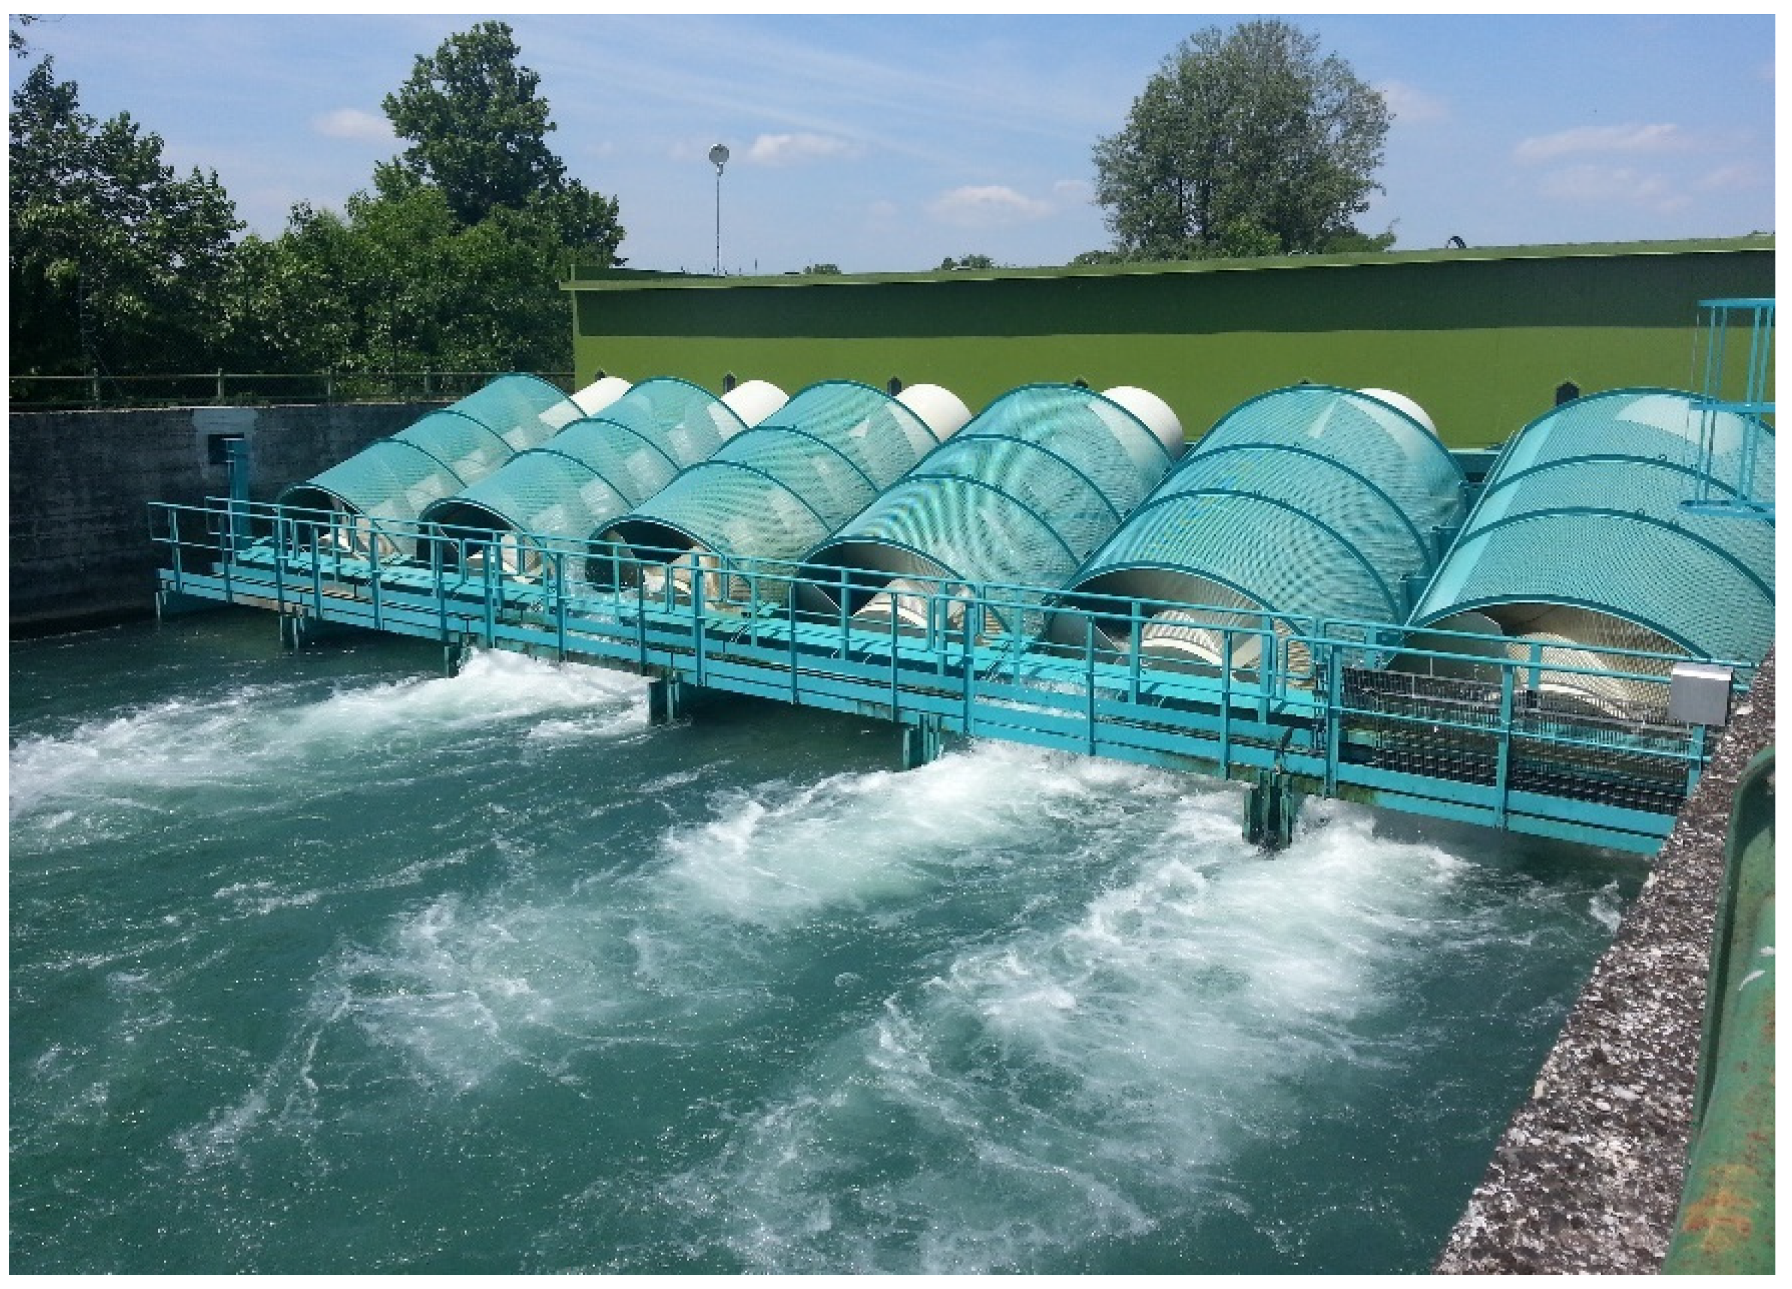 Sustainability Free Full-Text Archimedes Screw Turbines A Sustainable Development Solution for Green and Renewable Energy Generation—A Review of Potential and Design Procedures image